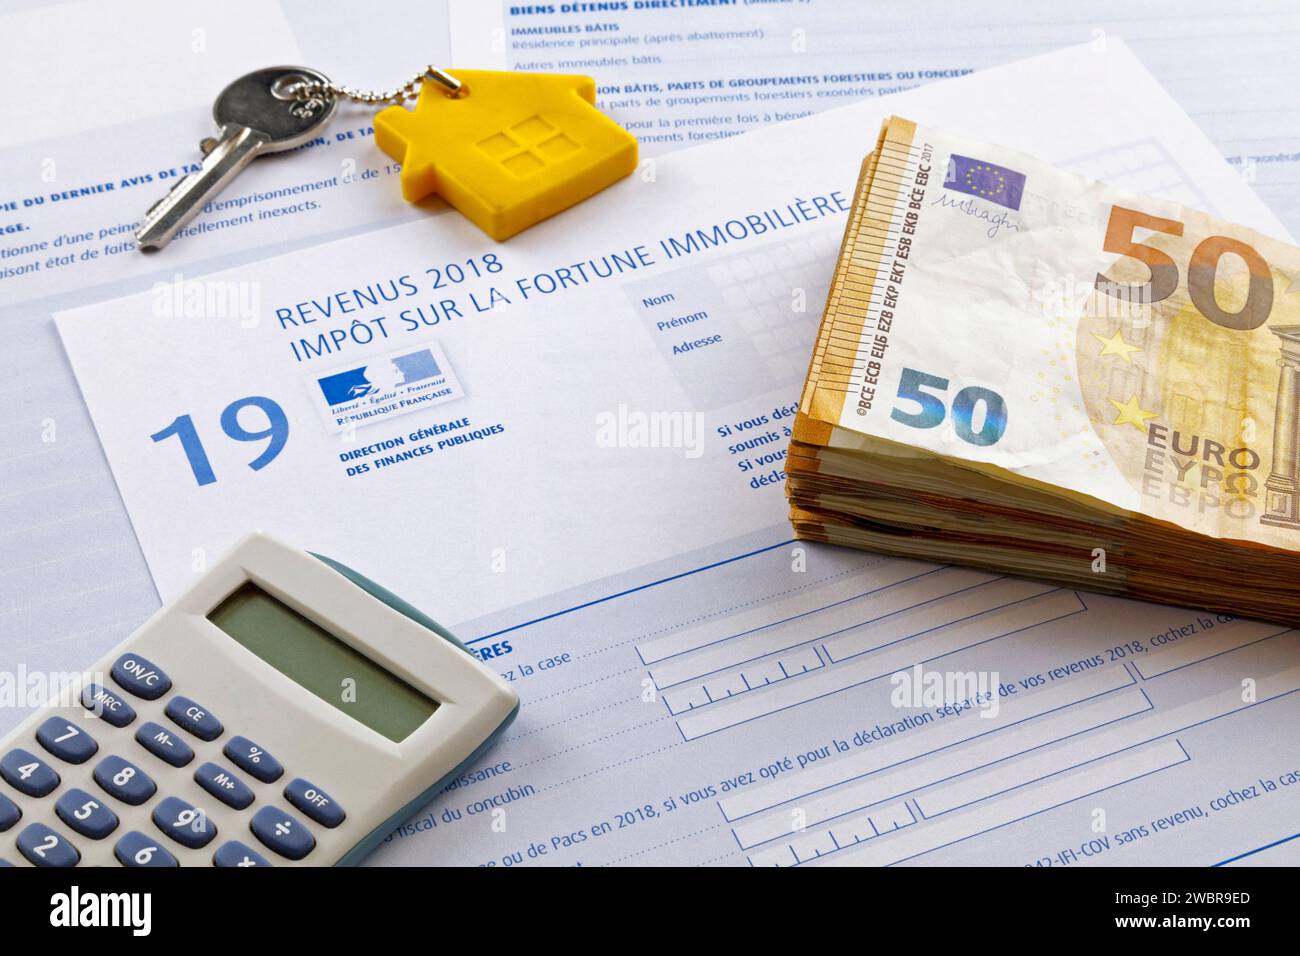 Stack of 50 euro banknotes, a home key and a calculator on the top of a French Property wealth tax form (Impôt sur la fortune immobilière). Stock Photo